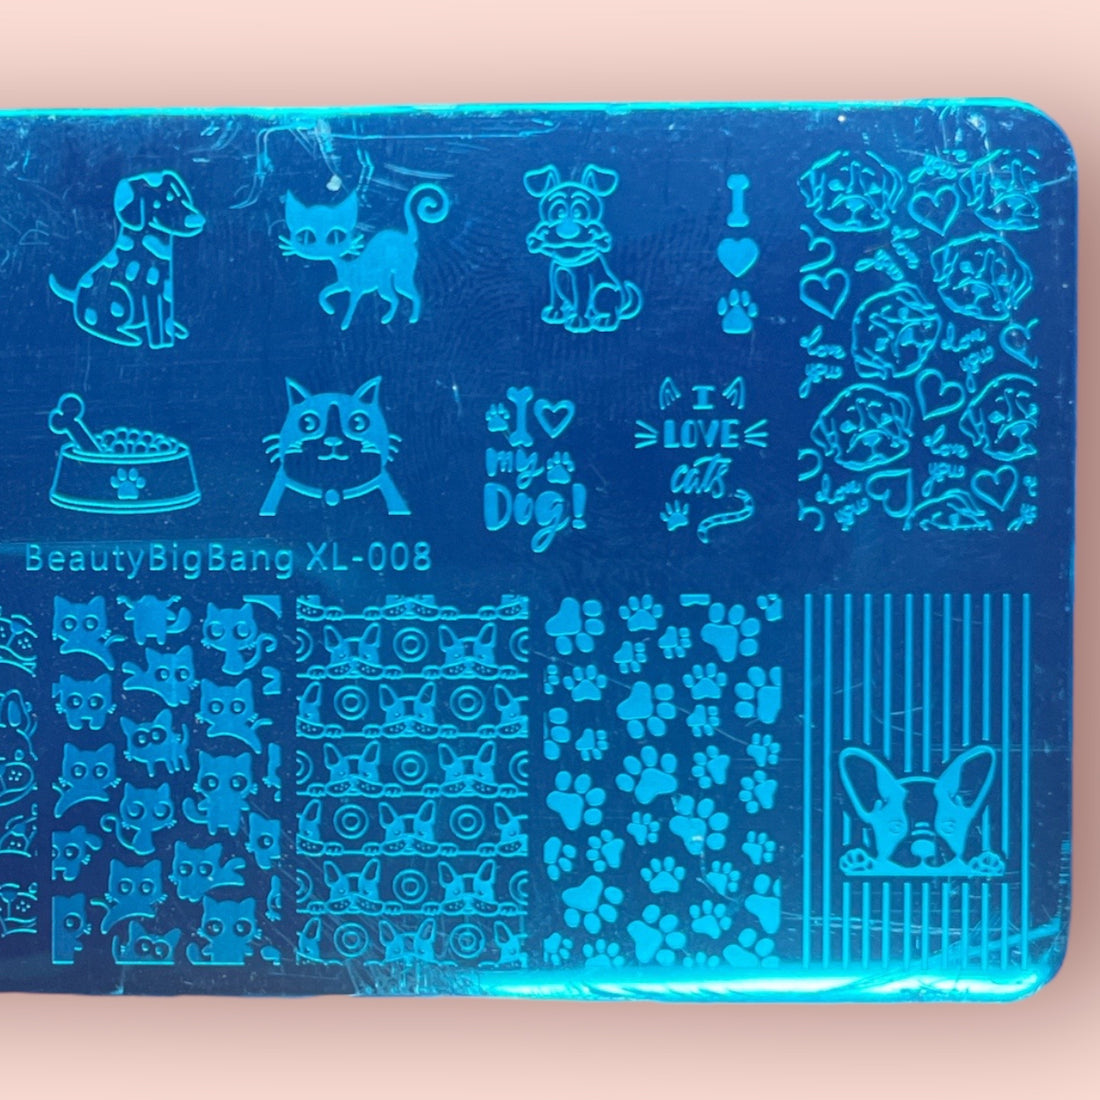 Stamping Plate #08: Cats & Dogs